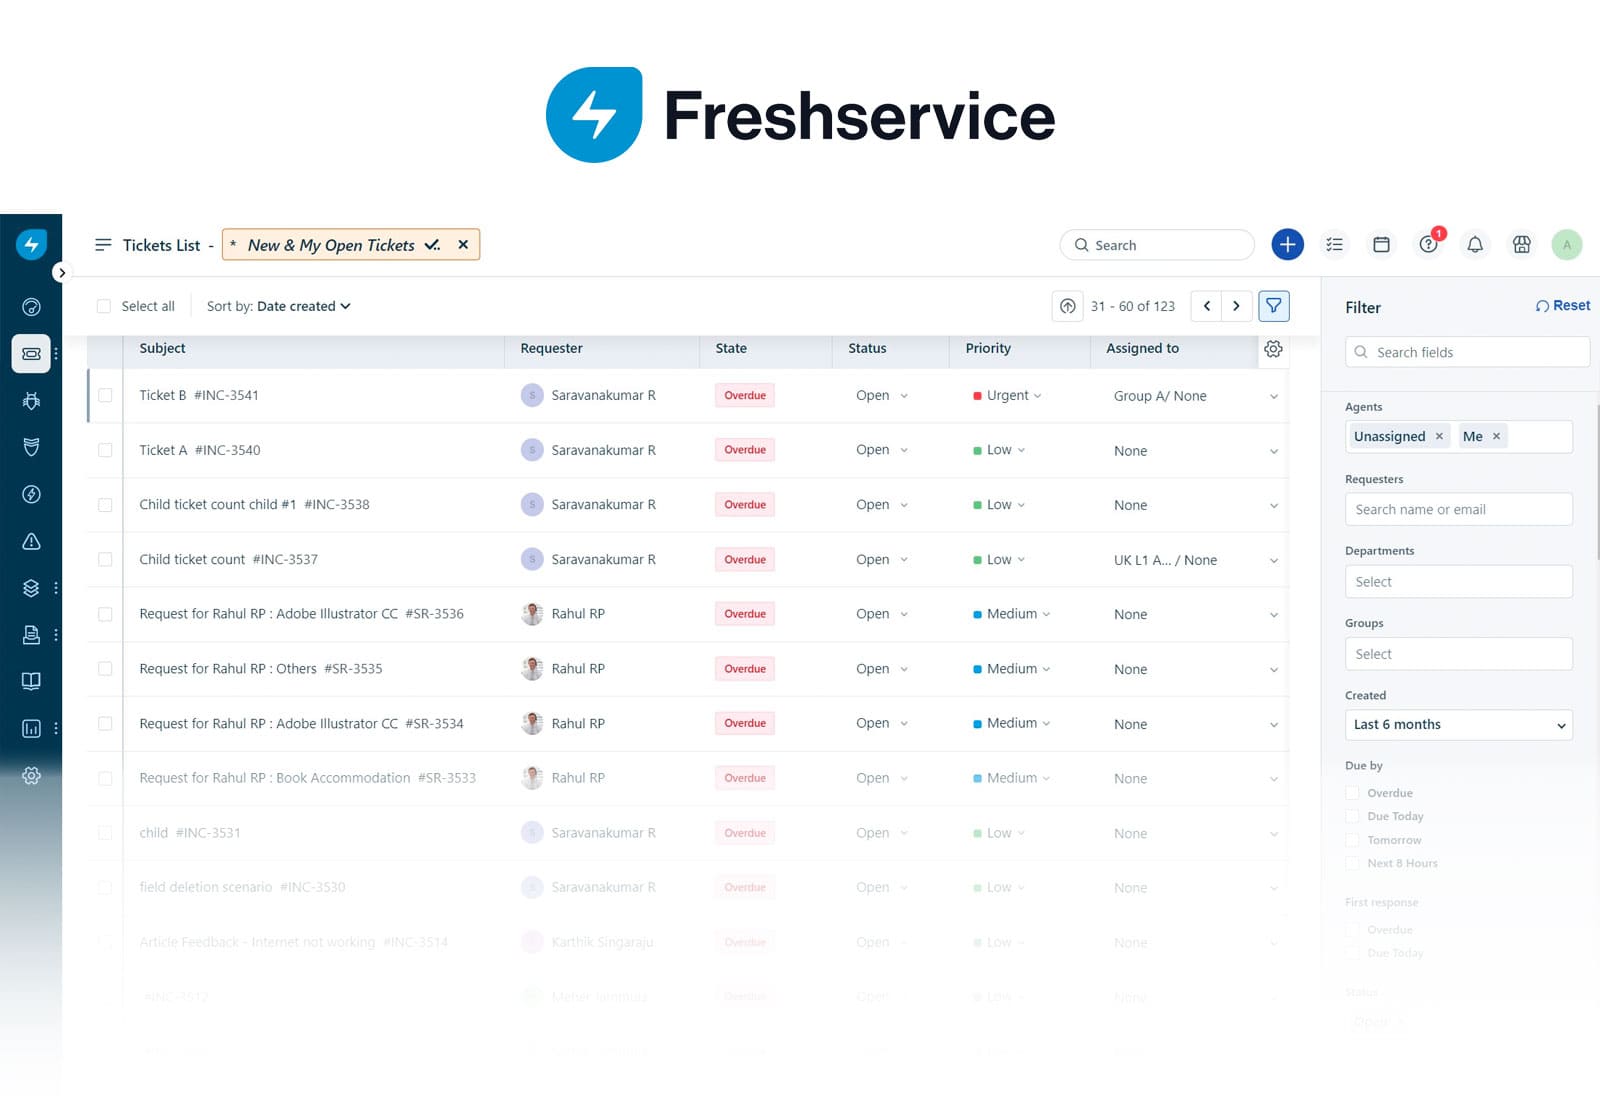 Example of Freshservice's interface.